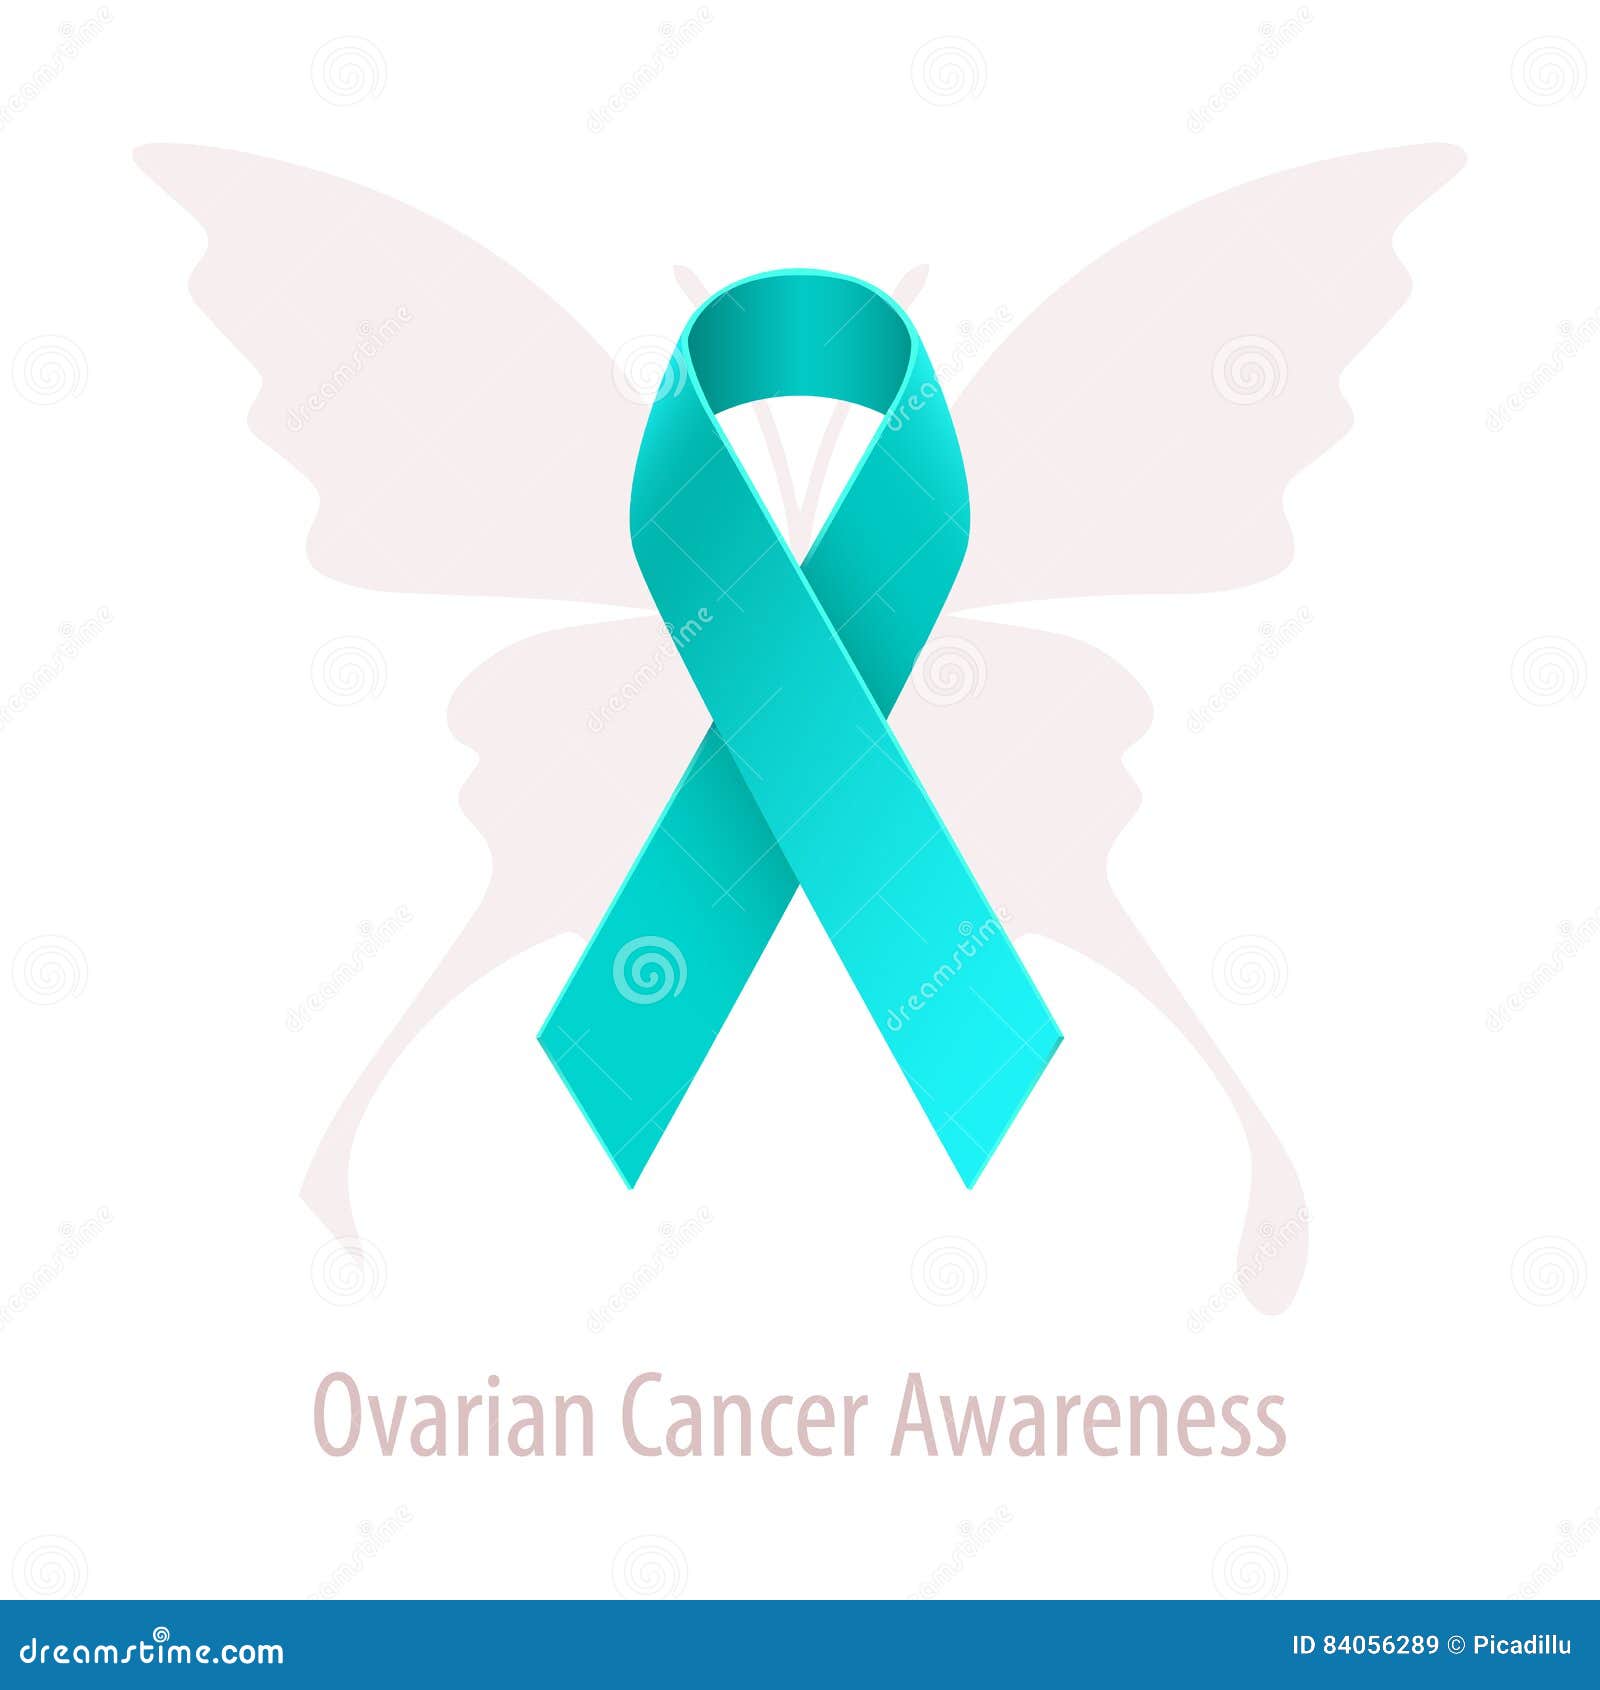 ovarian cancer awareness teal ribbon over butterfly silhouette